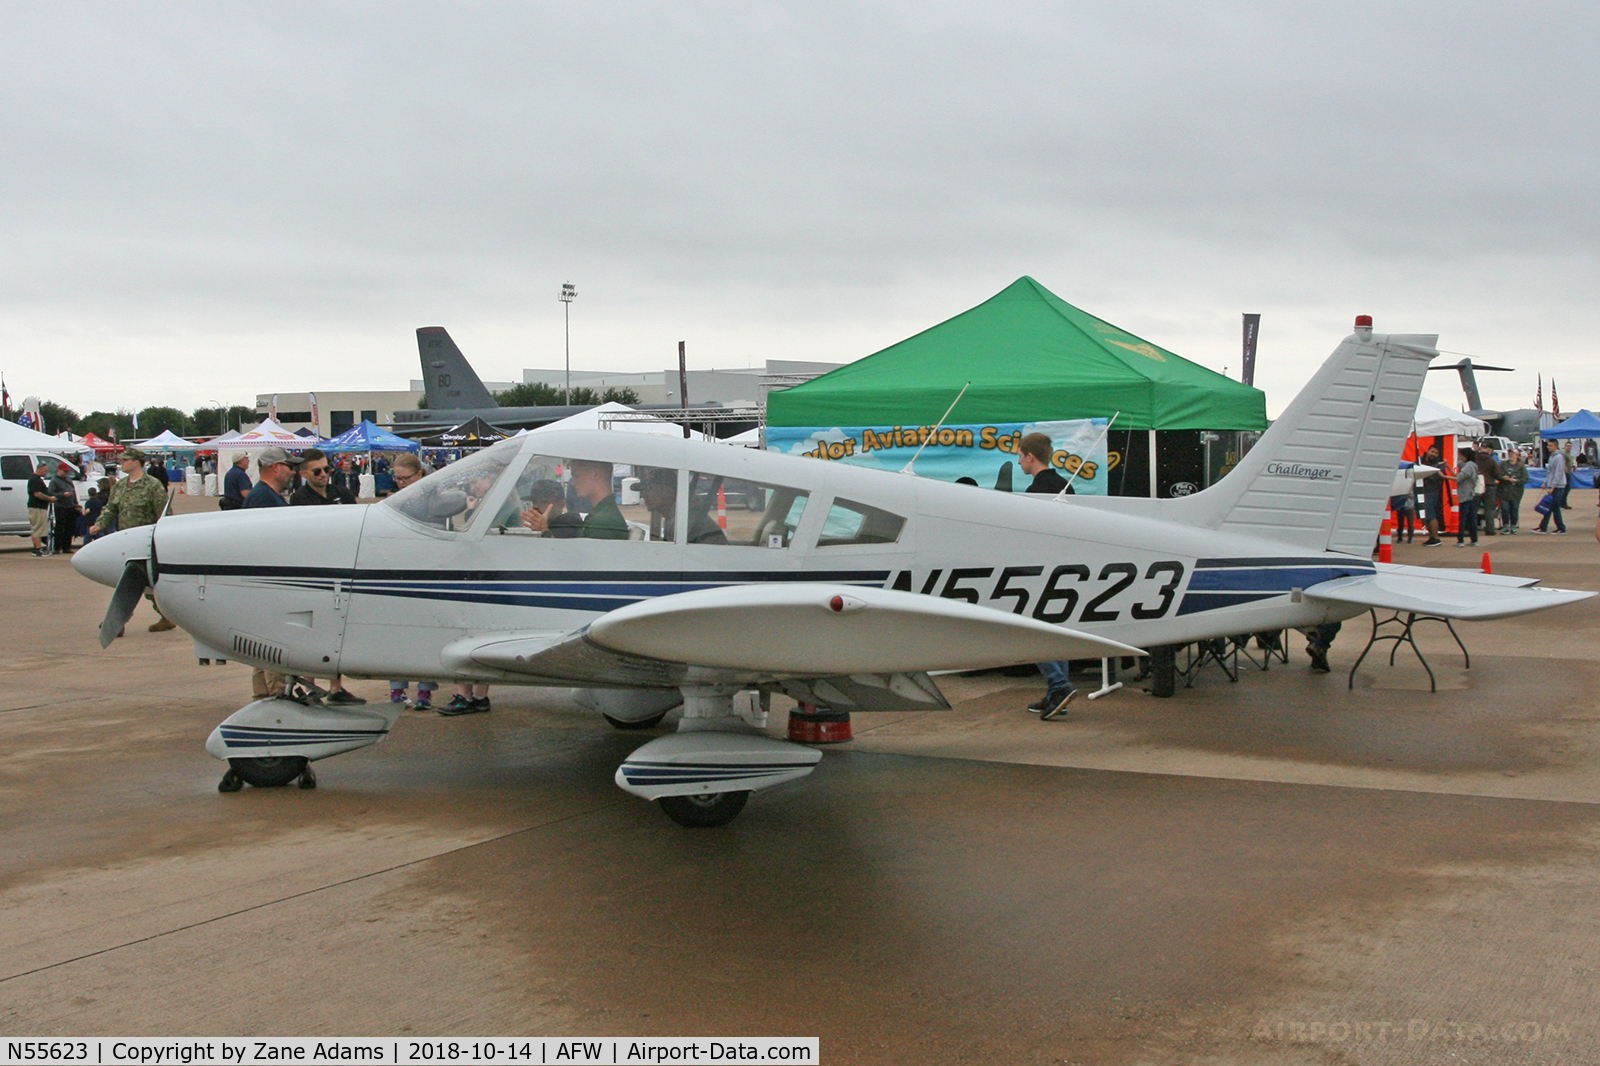 N55623, 1973 Piper PA-28-180 C/N 28-7305427, At the 2018 Alliance Airshow - Fort Worth, Texas